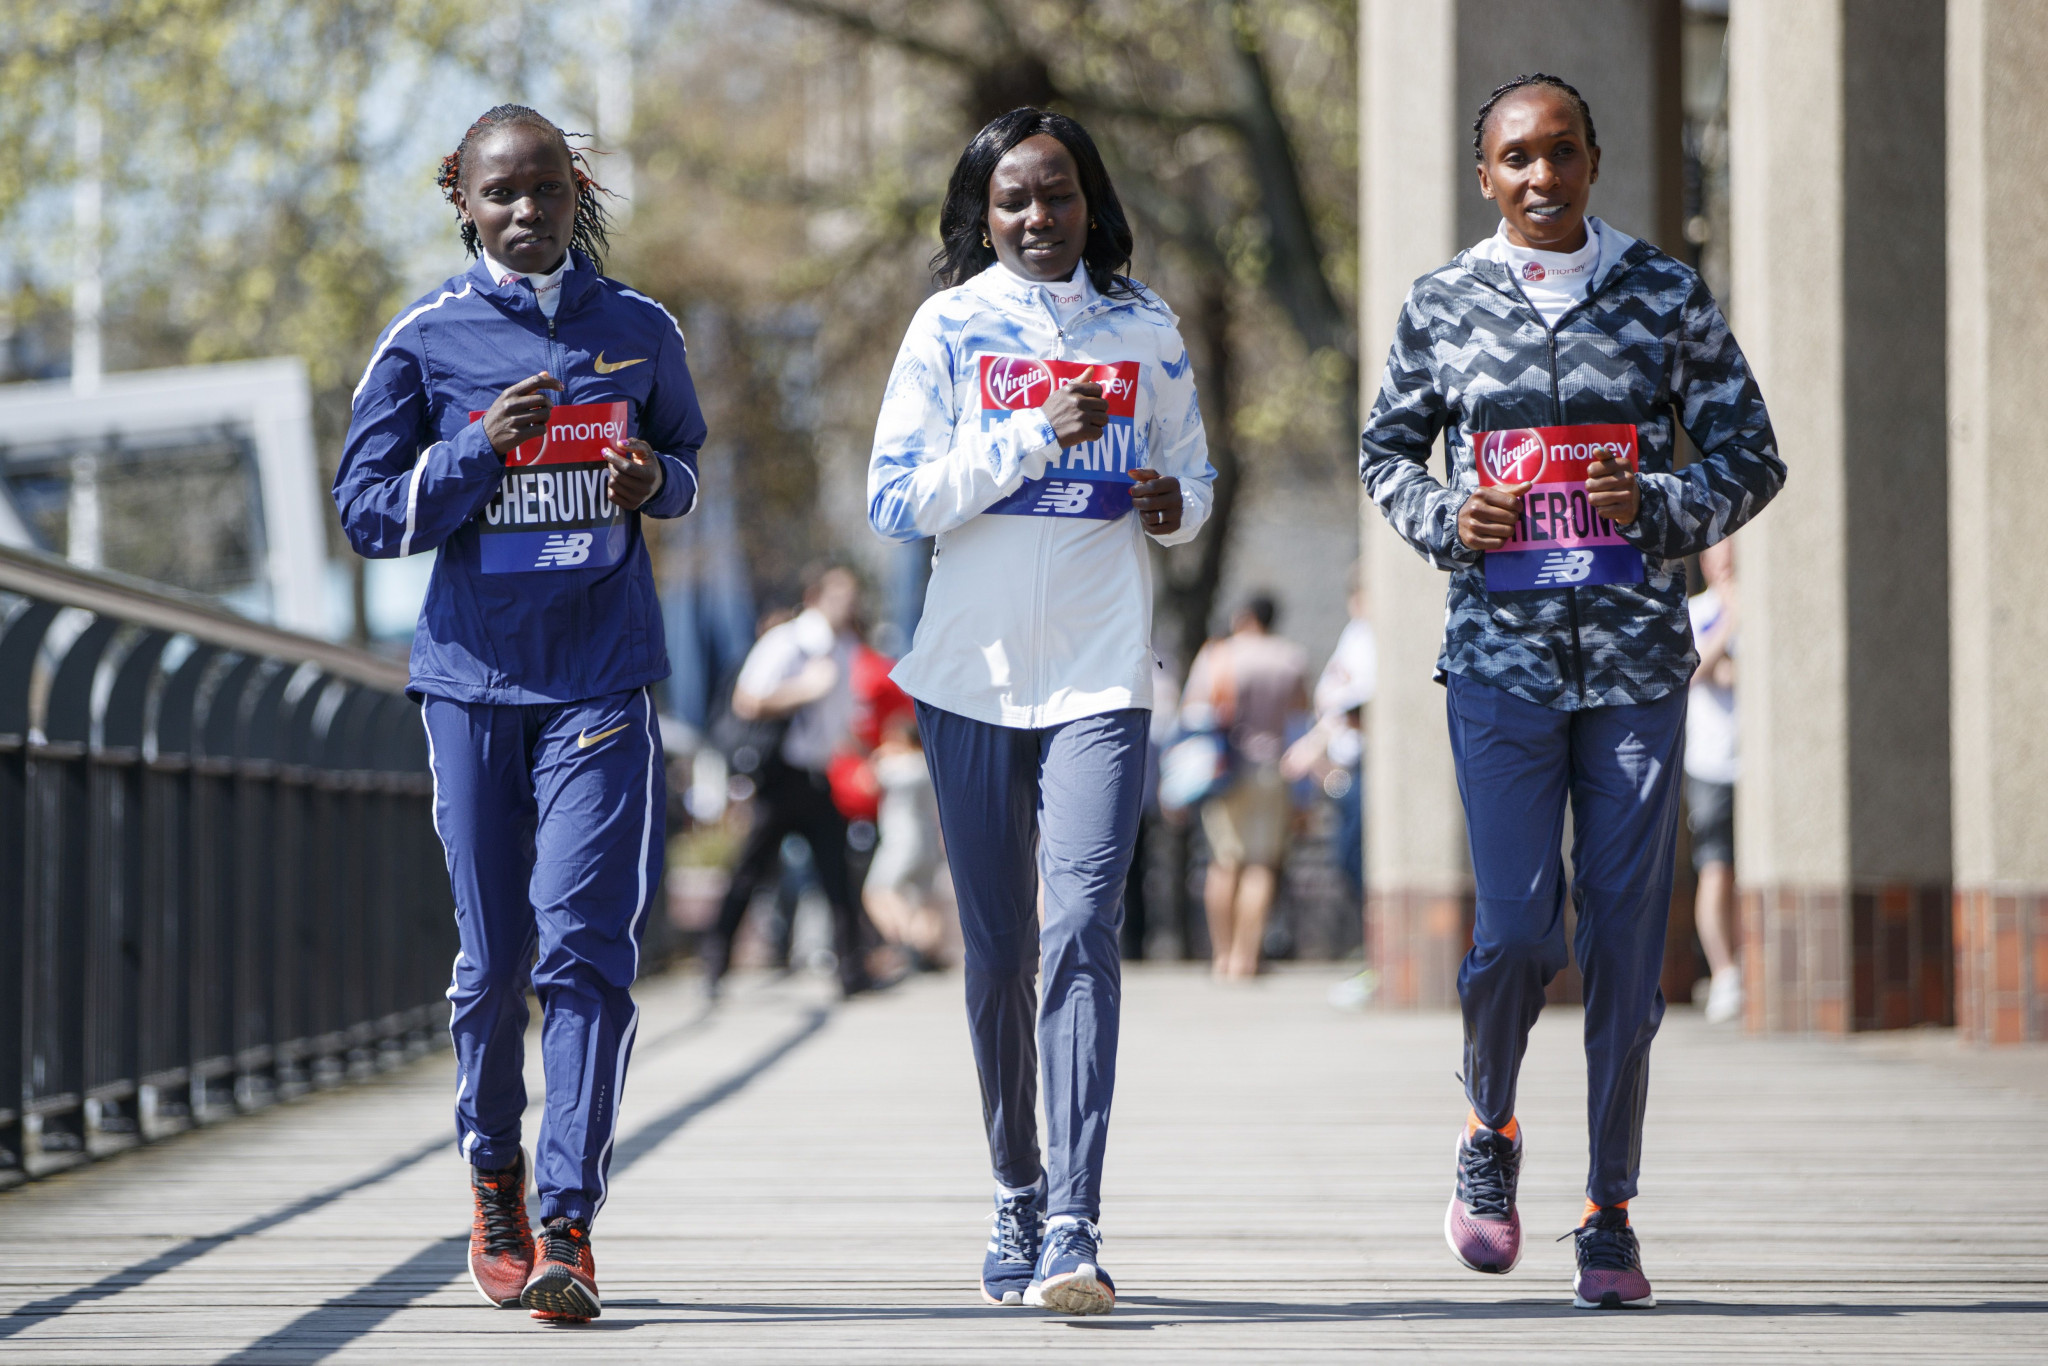 A strong women's field will battle it out for victory at the Virgin London Marathon ©Getty Images